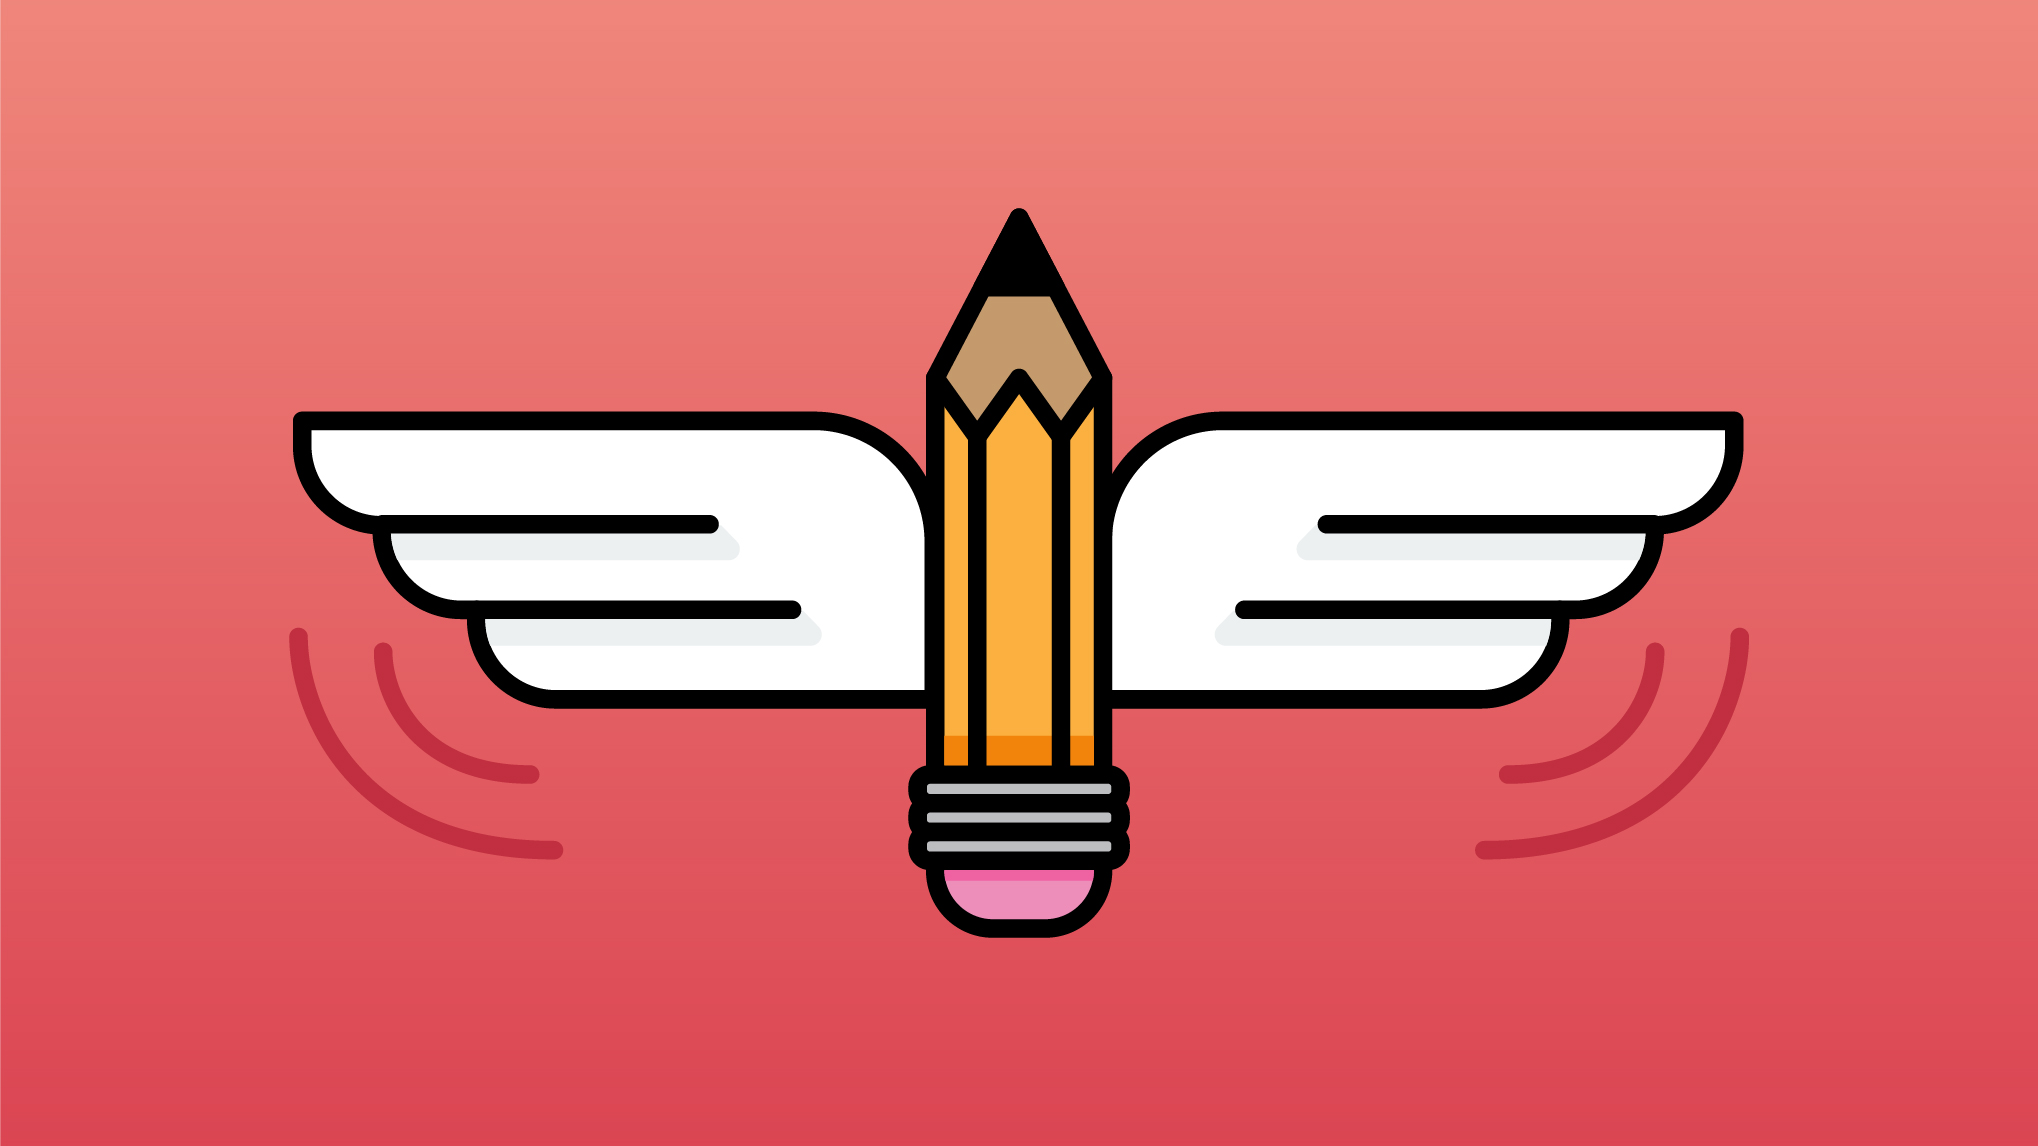 Illustration of a yellow pencil with wings.